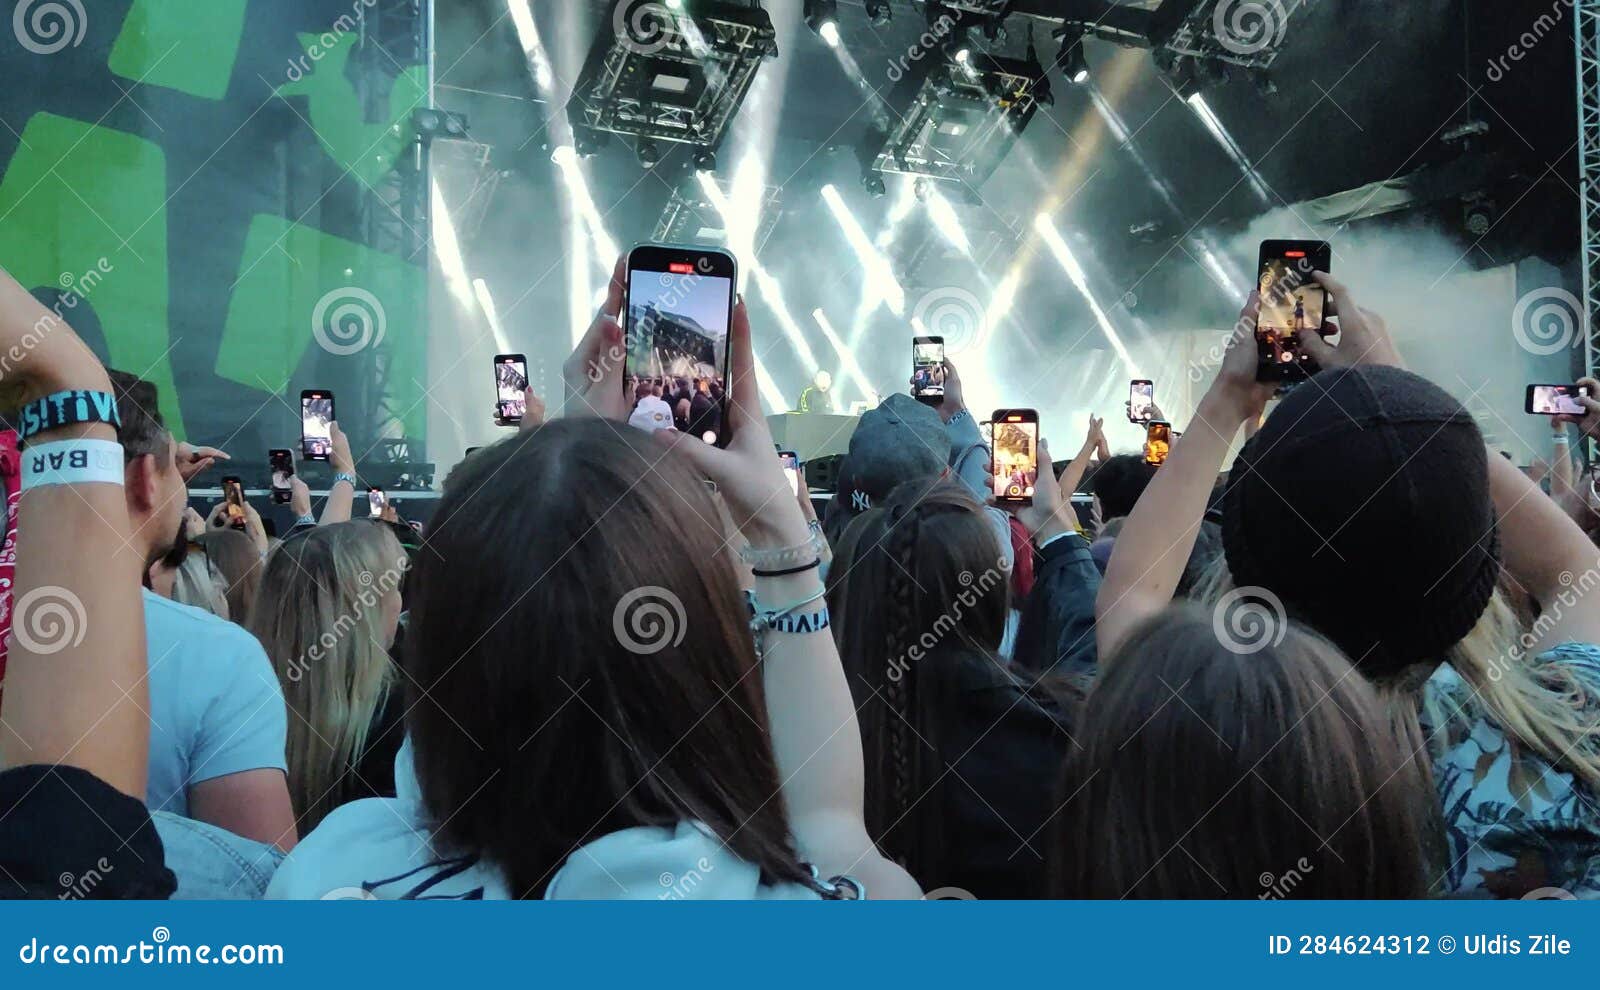 Fans Dancing Mosh Pit and Raising Their Hands at a Concert or Festival ...